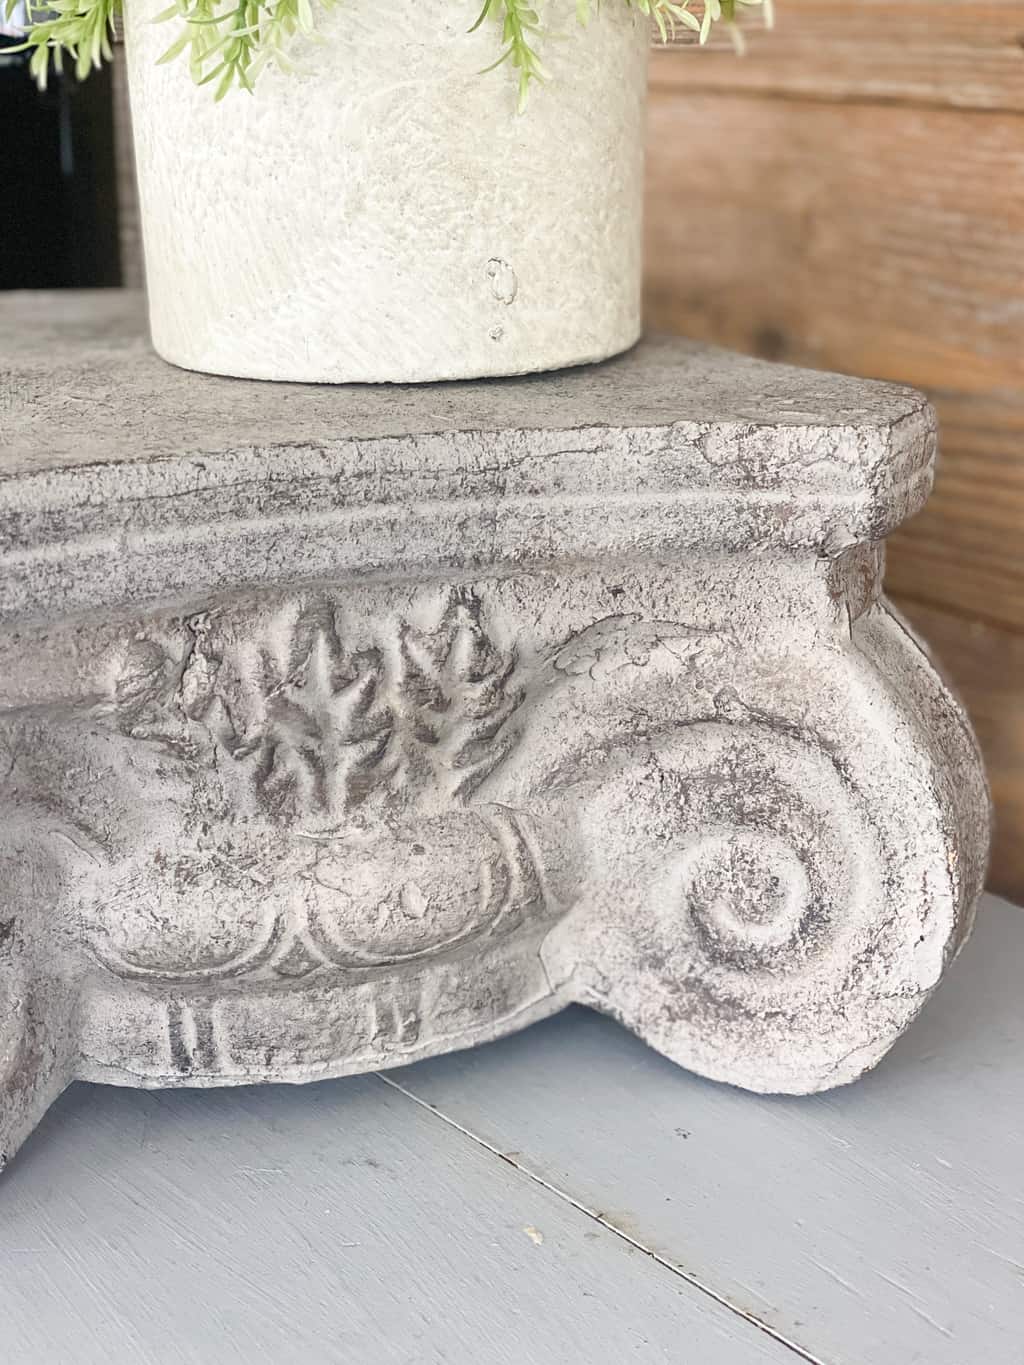 This DIY Restoration Hardware Dupe looks like the cast iron pedestal on their site! The process took little time and cost less than $10!!